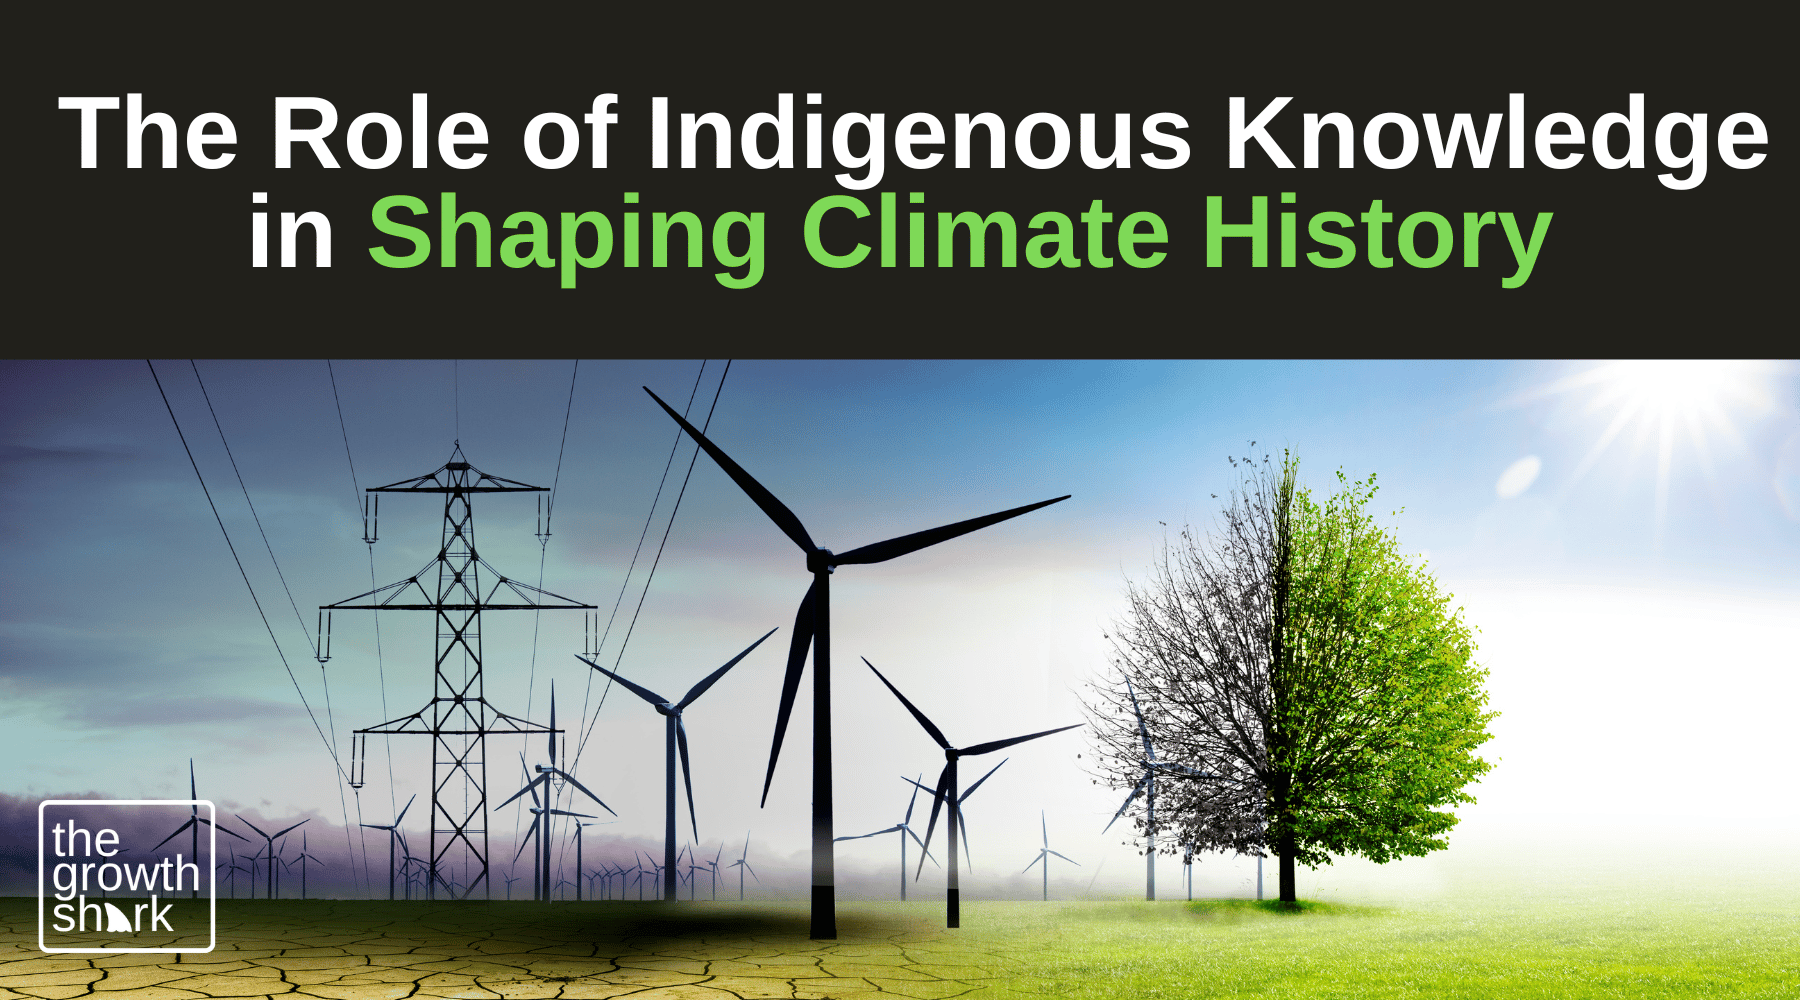  The Role of Indigenous Knowledge in Shaping Climate History